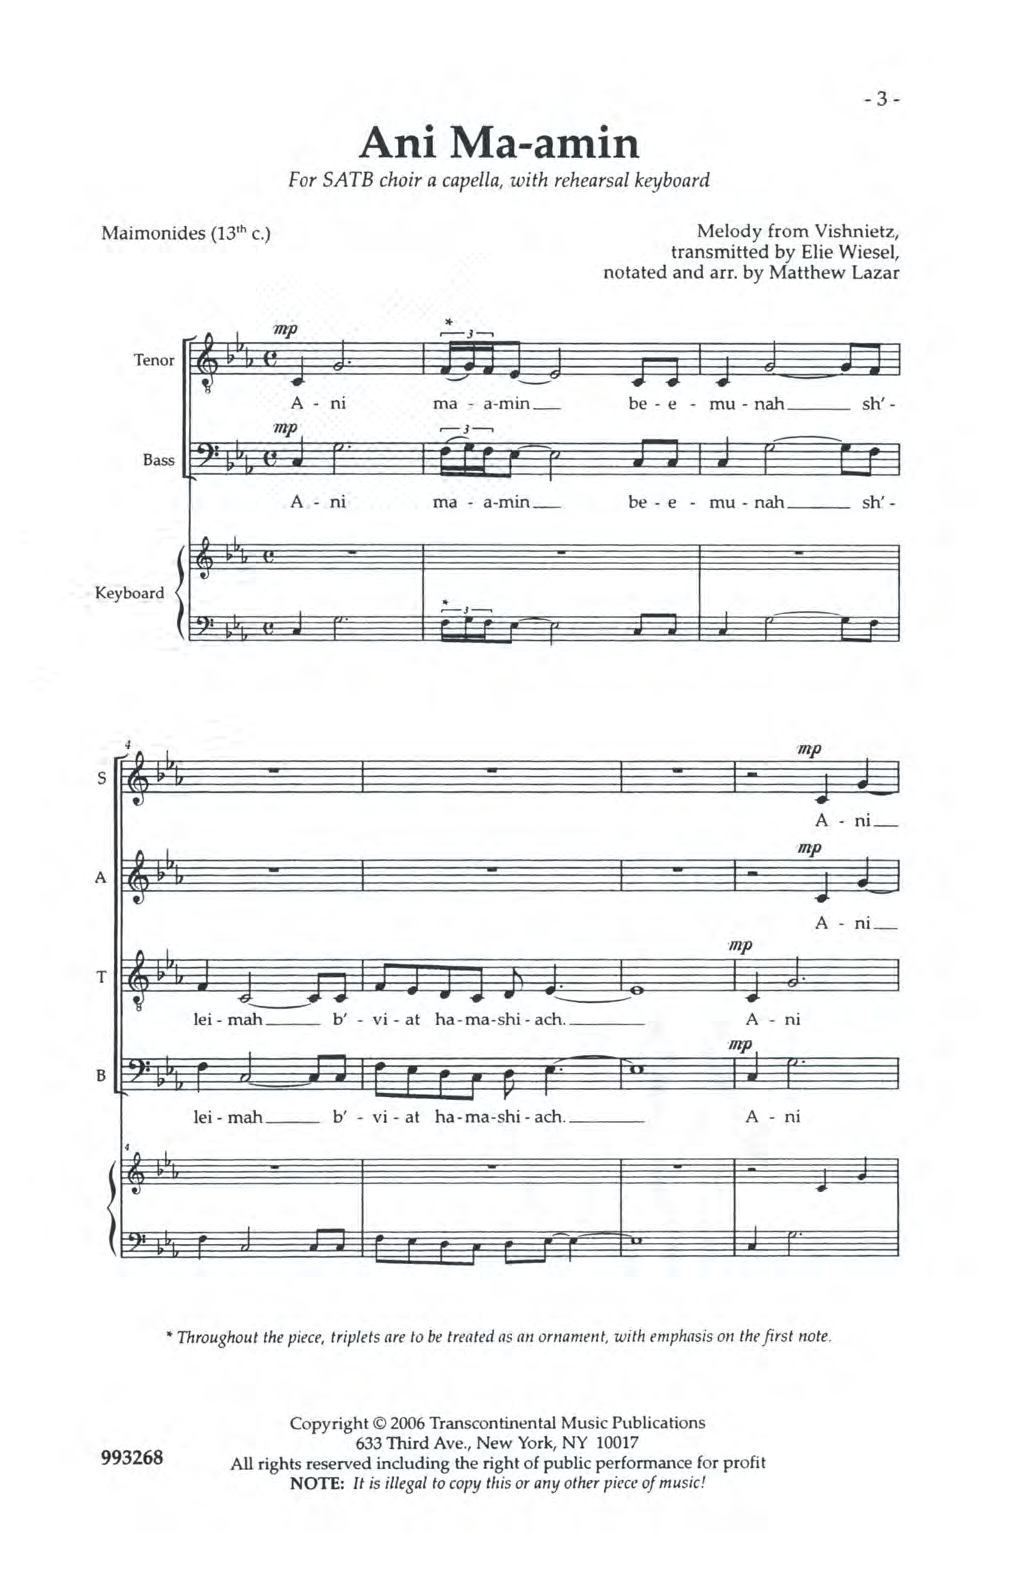 Elie Wisel Ani Ma-amin sheet music notes and chords. Download Printable PDF.